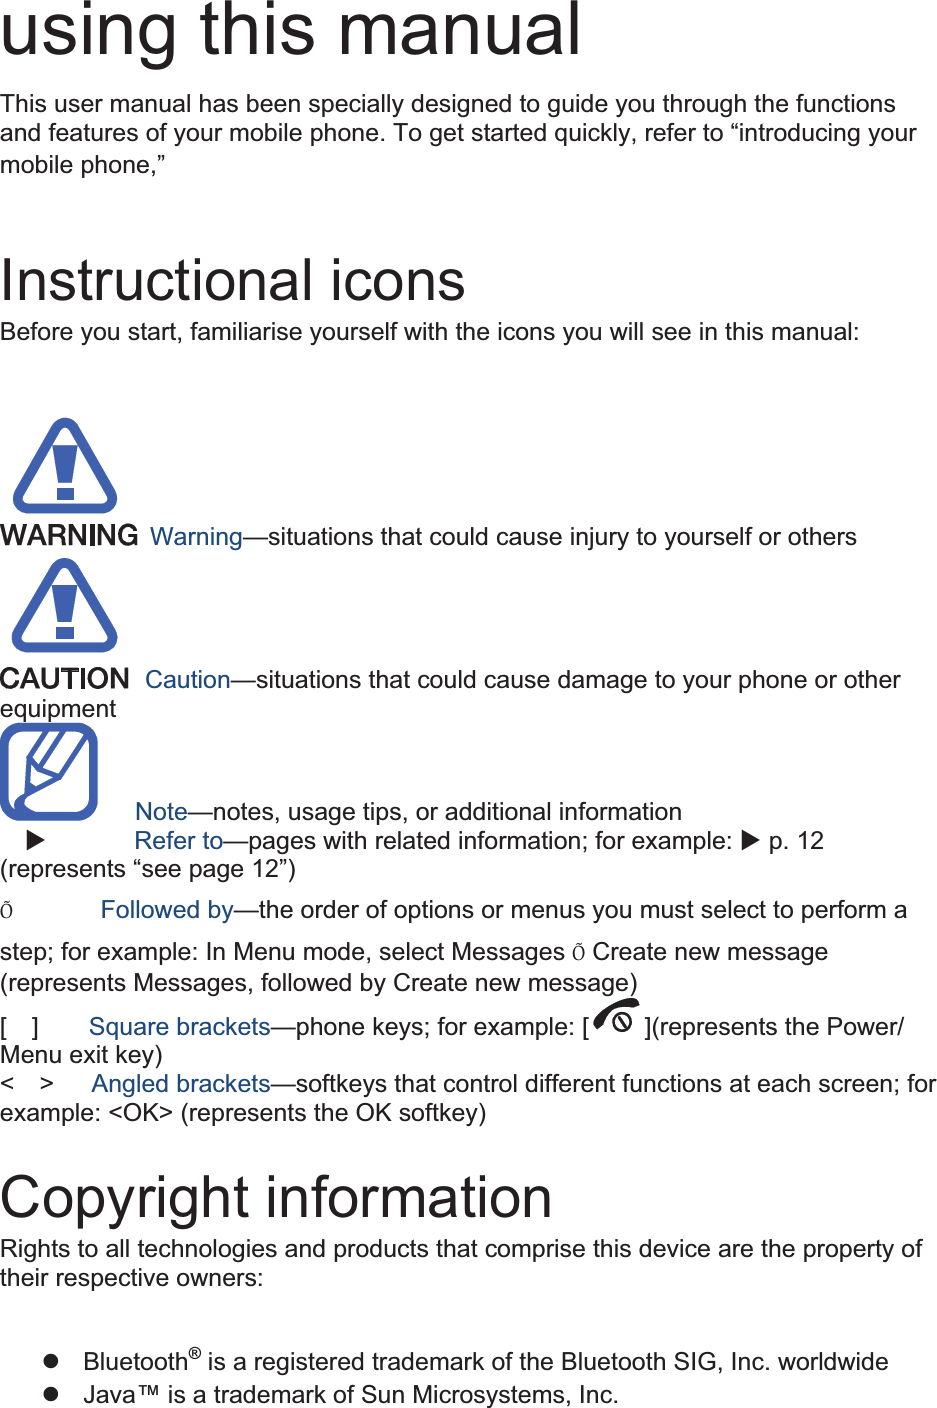 using this manual This user manual has been specially designed to guide you through the functions and features of your mobile phone. To get started quickly, refer to “introducing your mobile phone,”  Instructional icons Before you start, familiarise yourself with the icons you will see in this manual:   Warning—situations that could cause injury to yourself or others Caution—situations that could cause damage to your phone or other equipment Note—notes, usage tips, or additional information   XRefer to—pages with related information; for example: X p. 12 (represents “see page 12”) [  Followed by—the order of options or menus you must select to perform a step; for example: In Menu mode, select Messages [ Create new message (represents Messages, followed by Create new message) [  ] Square brackets—phone keys; for example: [ ](represents the Power/ Menu exit key) &lt;  &gt;  Angled brackets—softkeys that control different functions at each screen; for example: &lt;OK&gt; (represents the OK softkey) Copyright information Rights to all technologies and products that comprise this device are the property of their respective owners: z Bluetooth® is a registered trademark of the Bluetooth SIG, Inc. worldwide z  Java™ is a trademark of Sun Microsystems, Inc. 